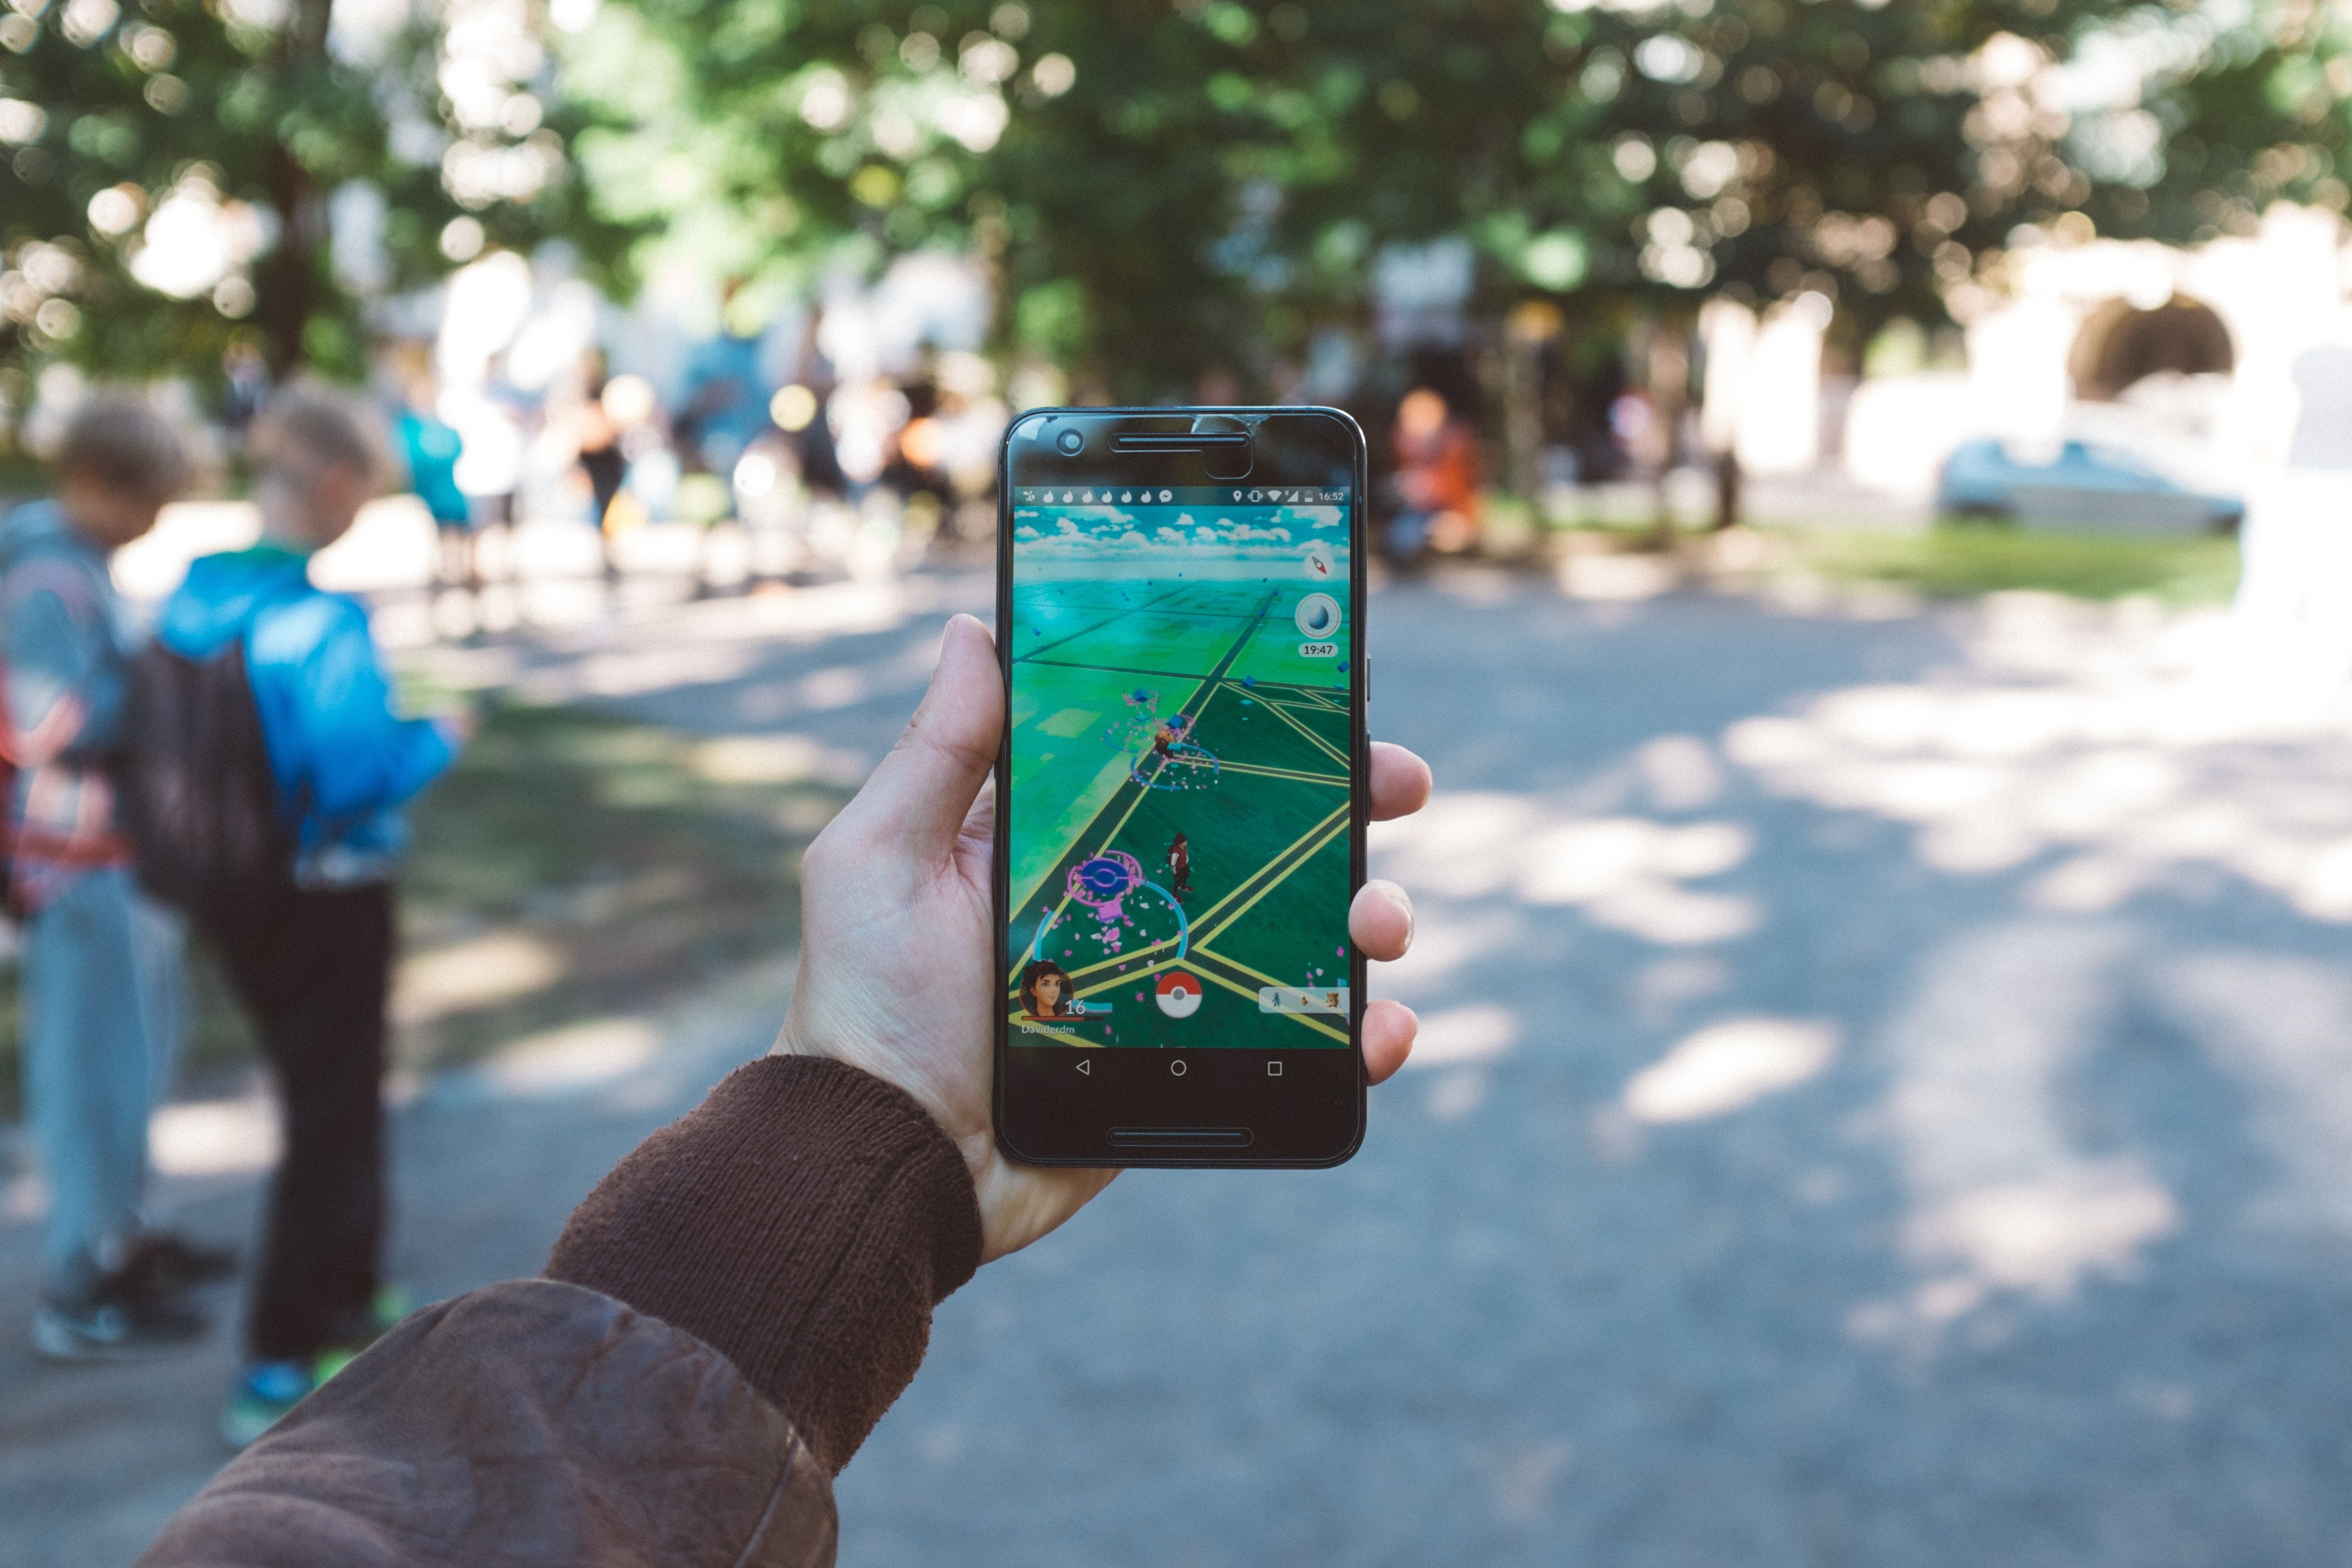 How much does it cost to develop an app like Pokemon Go?